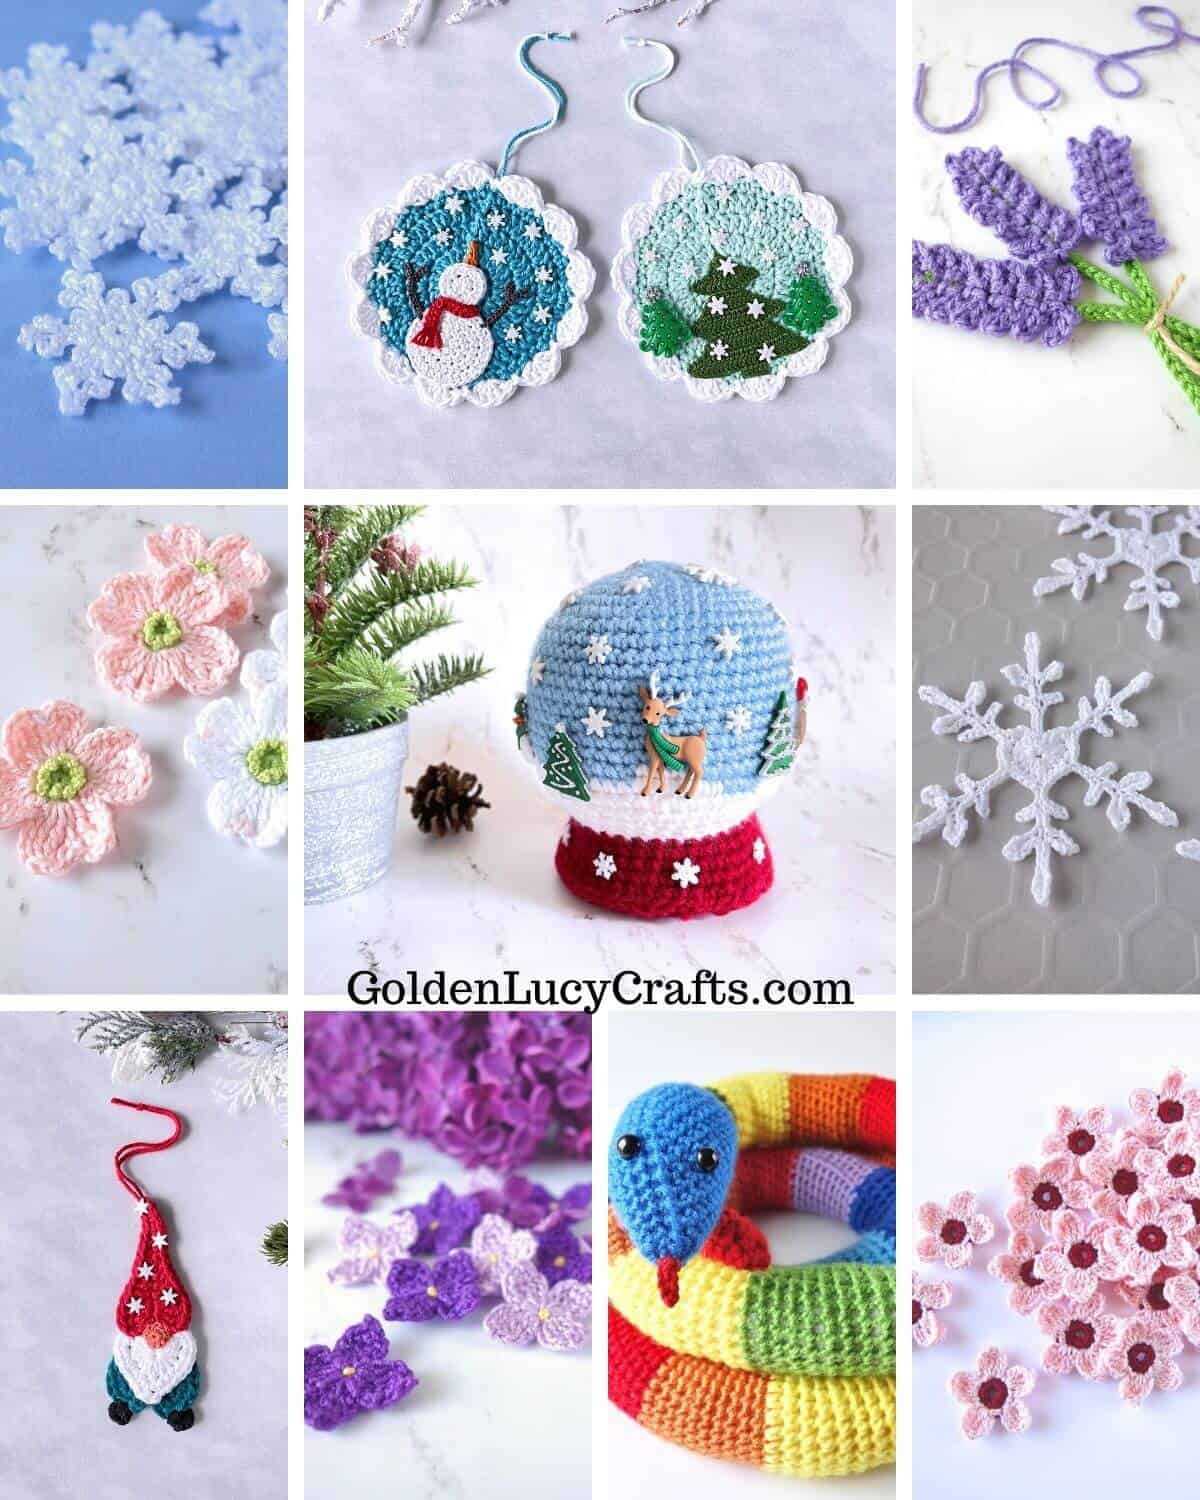 Crochet top 10 patterns of 2021 on GoldenLucyCrafts - photo collage.